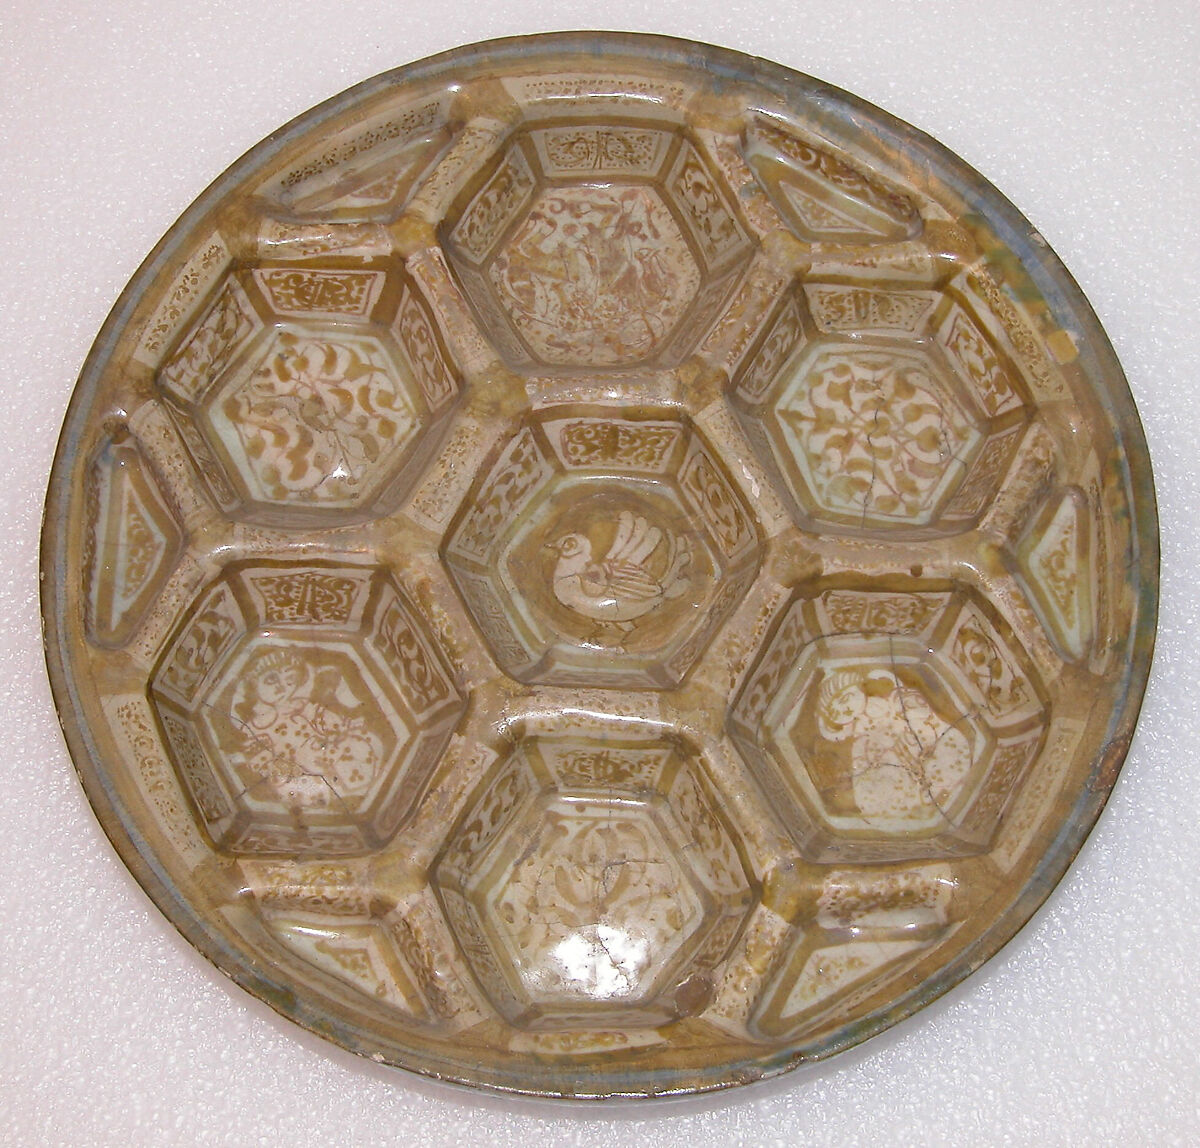 Dish, Stonepaste; molded; luster-painted on opaque white glaze under transparent colorless glaze 